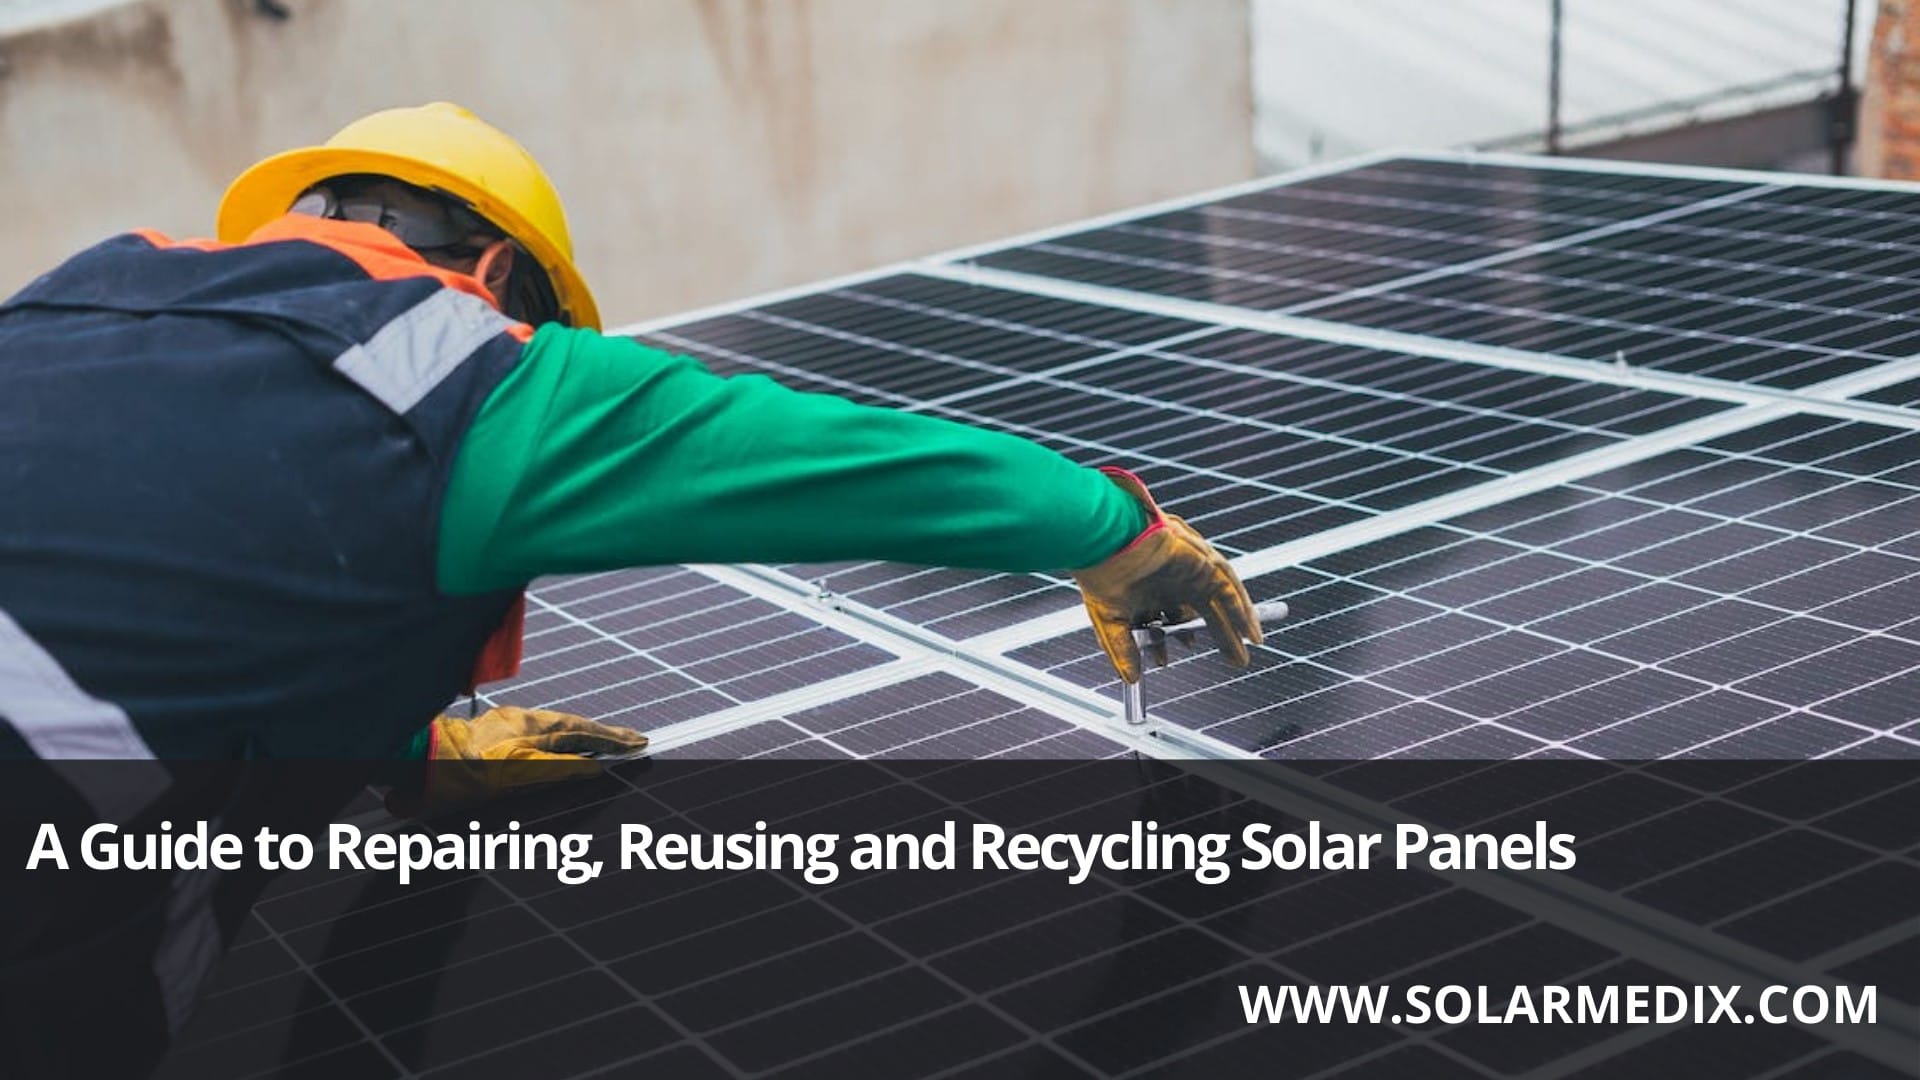 Guide to Repairing, Reusing, and Recycling Solar Panels